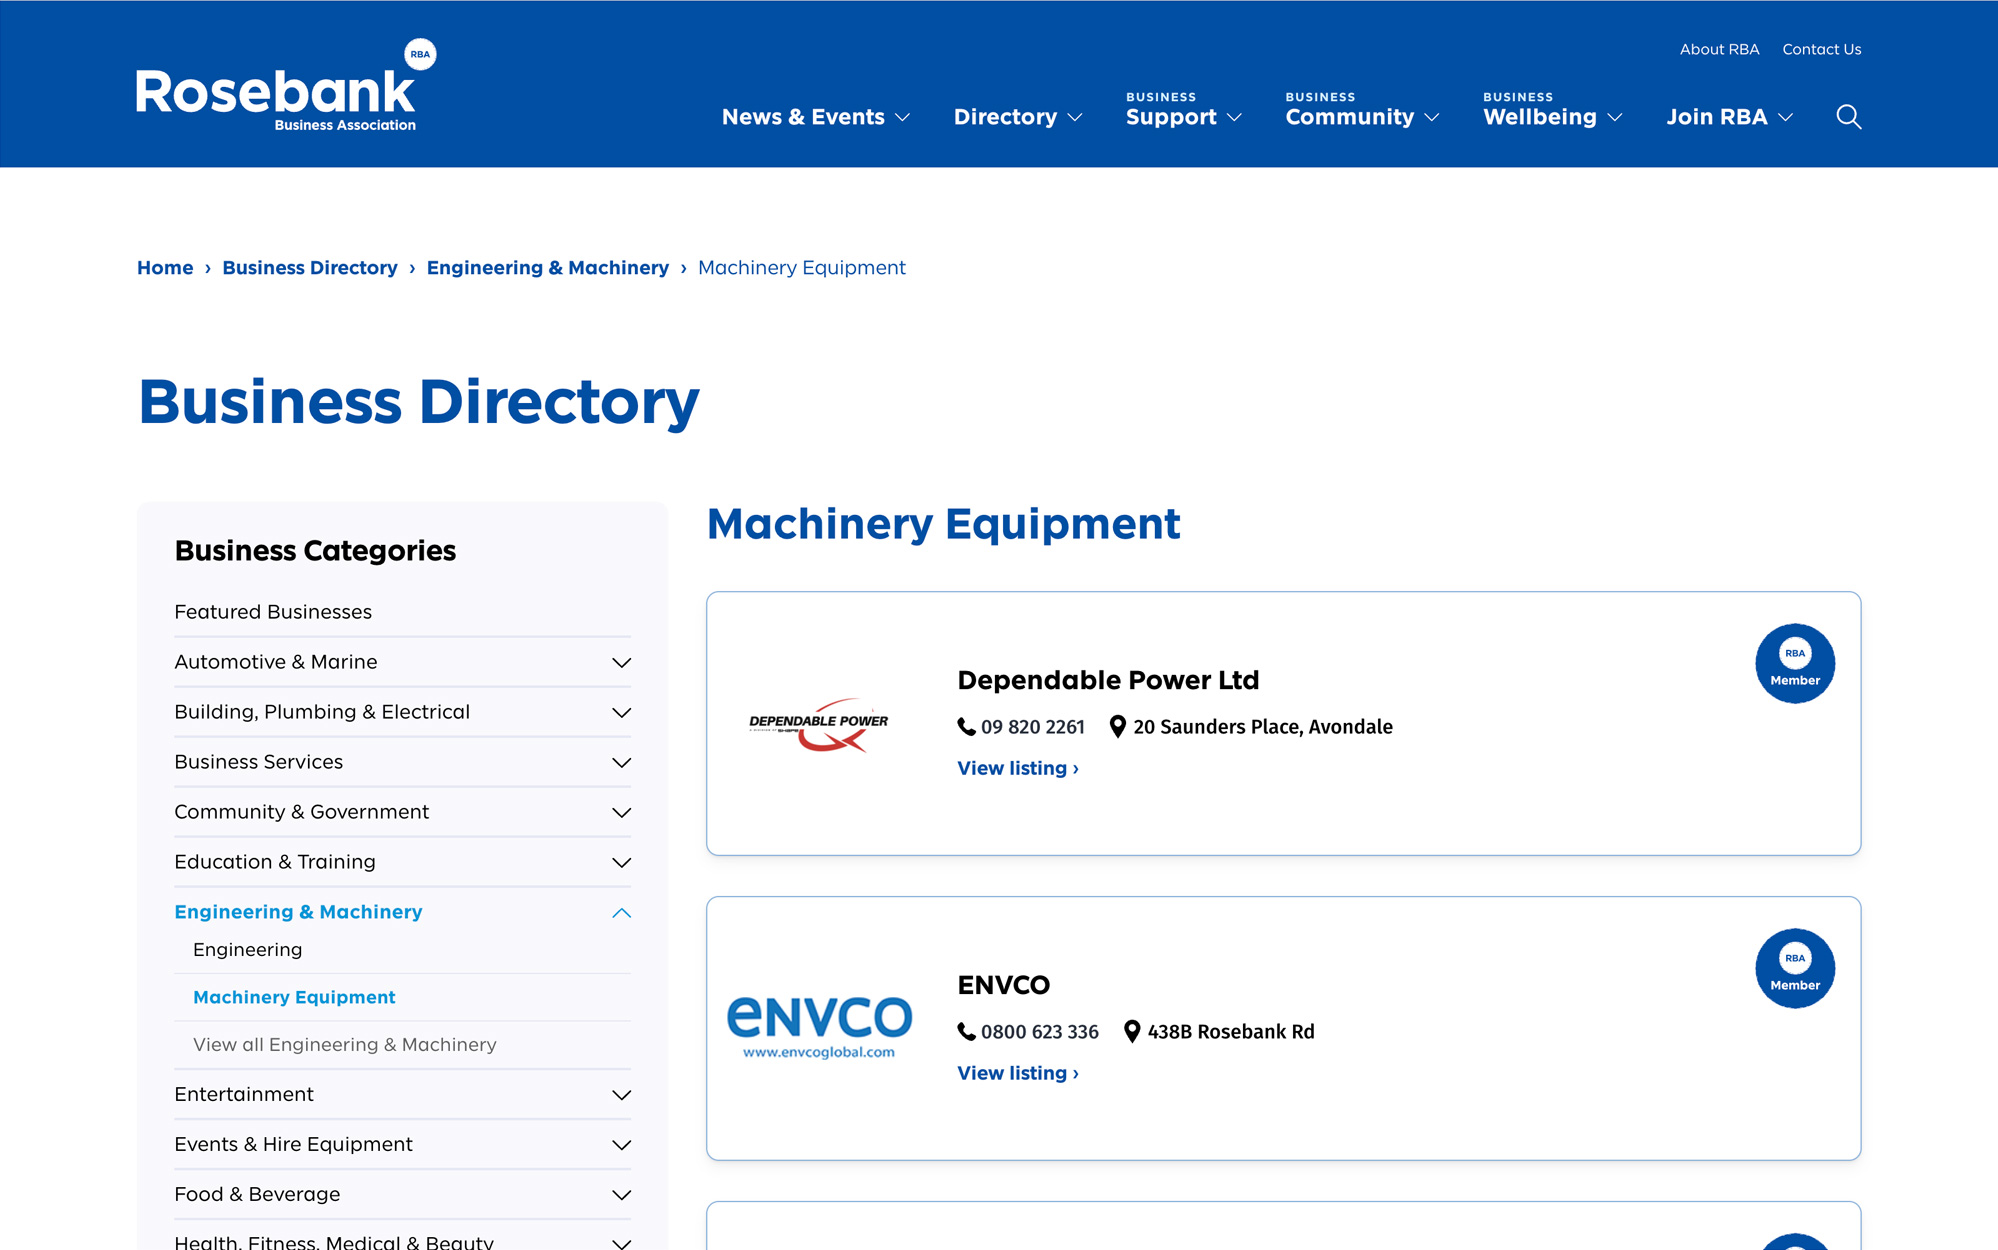 A screenshot of the RBA Business Directory, showing listings in the "Machinery Equipment" category